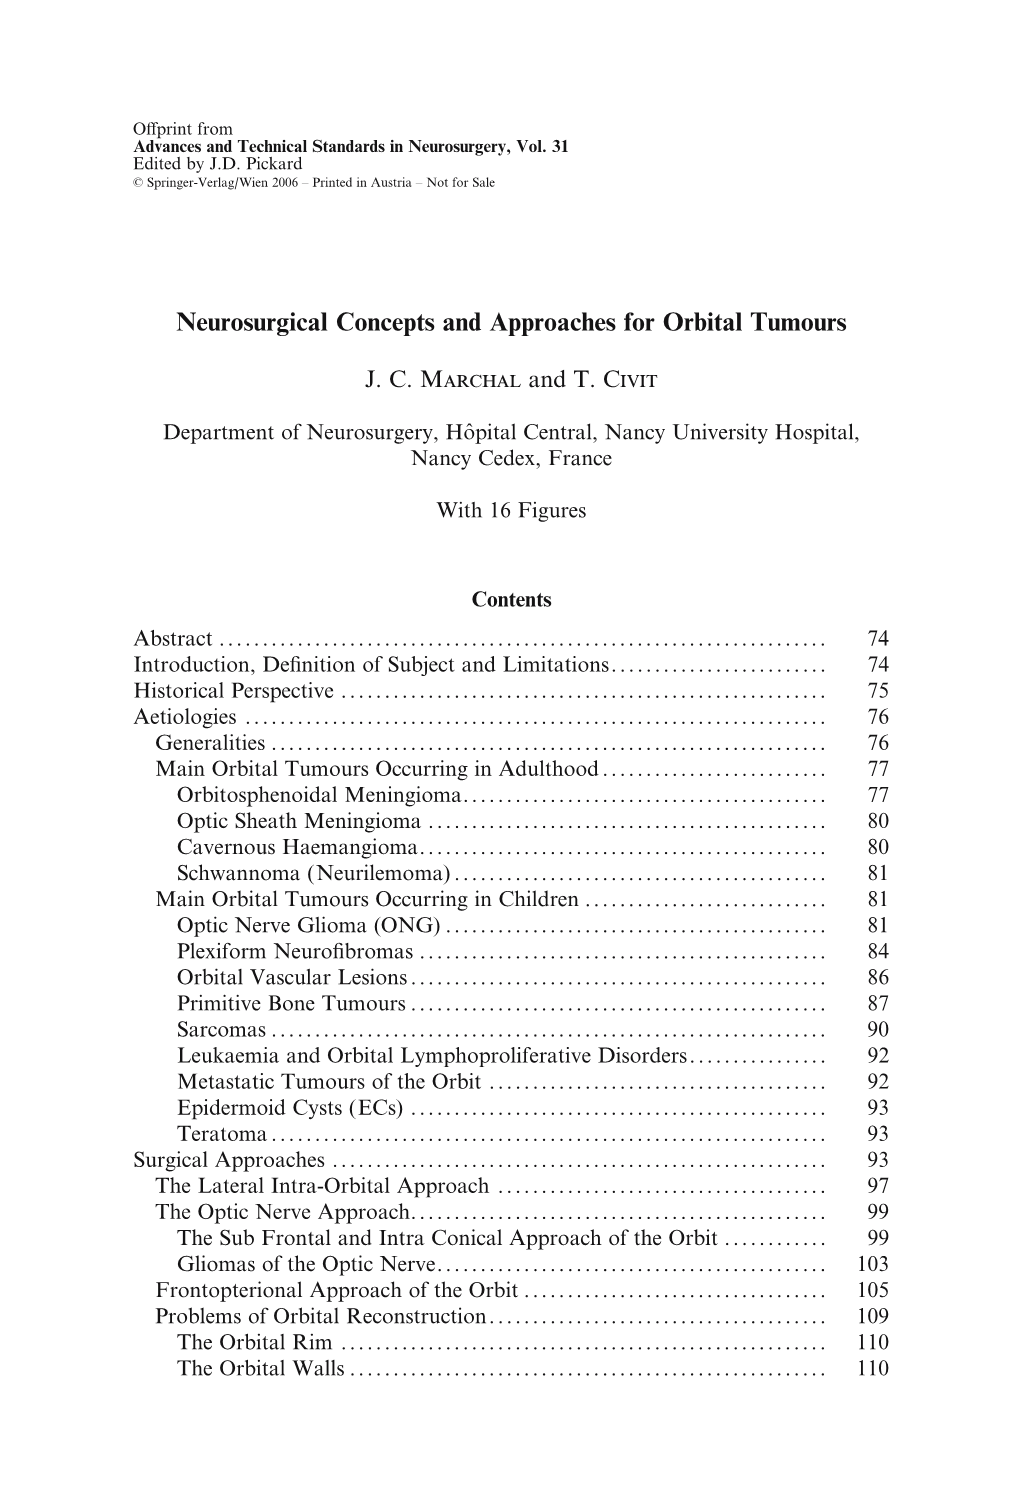 Neurosurgical Concepts and Approaches for Orbital Tumours